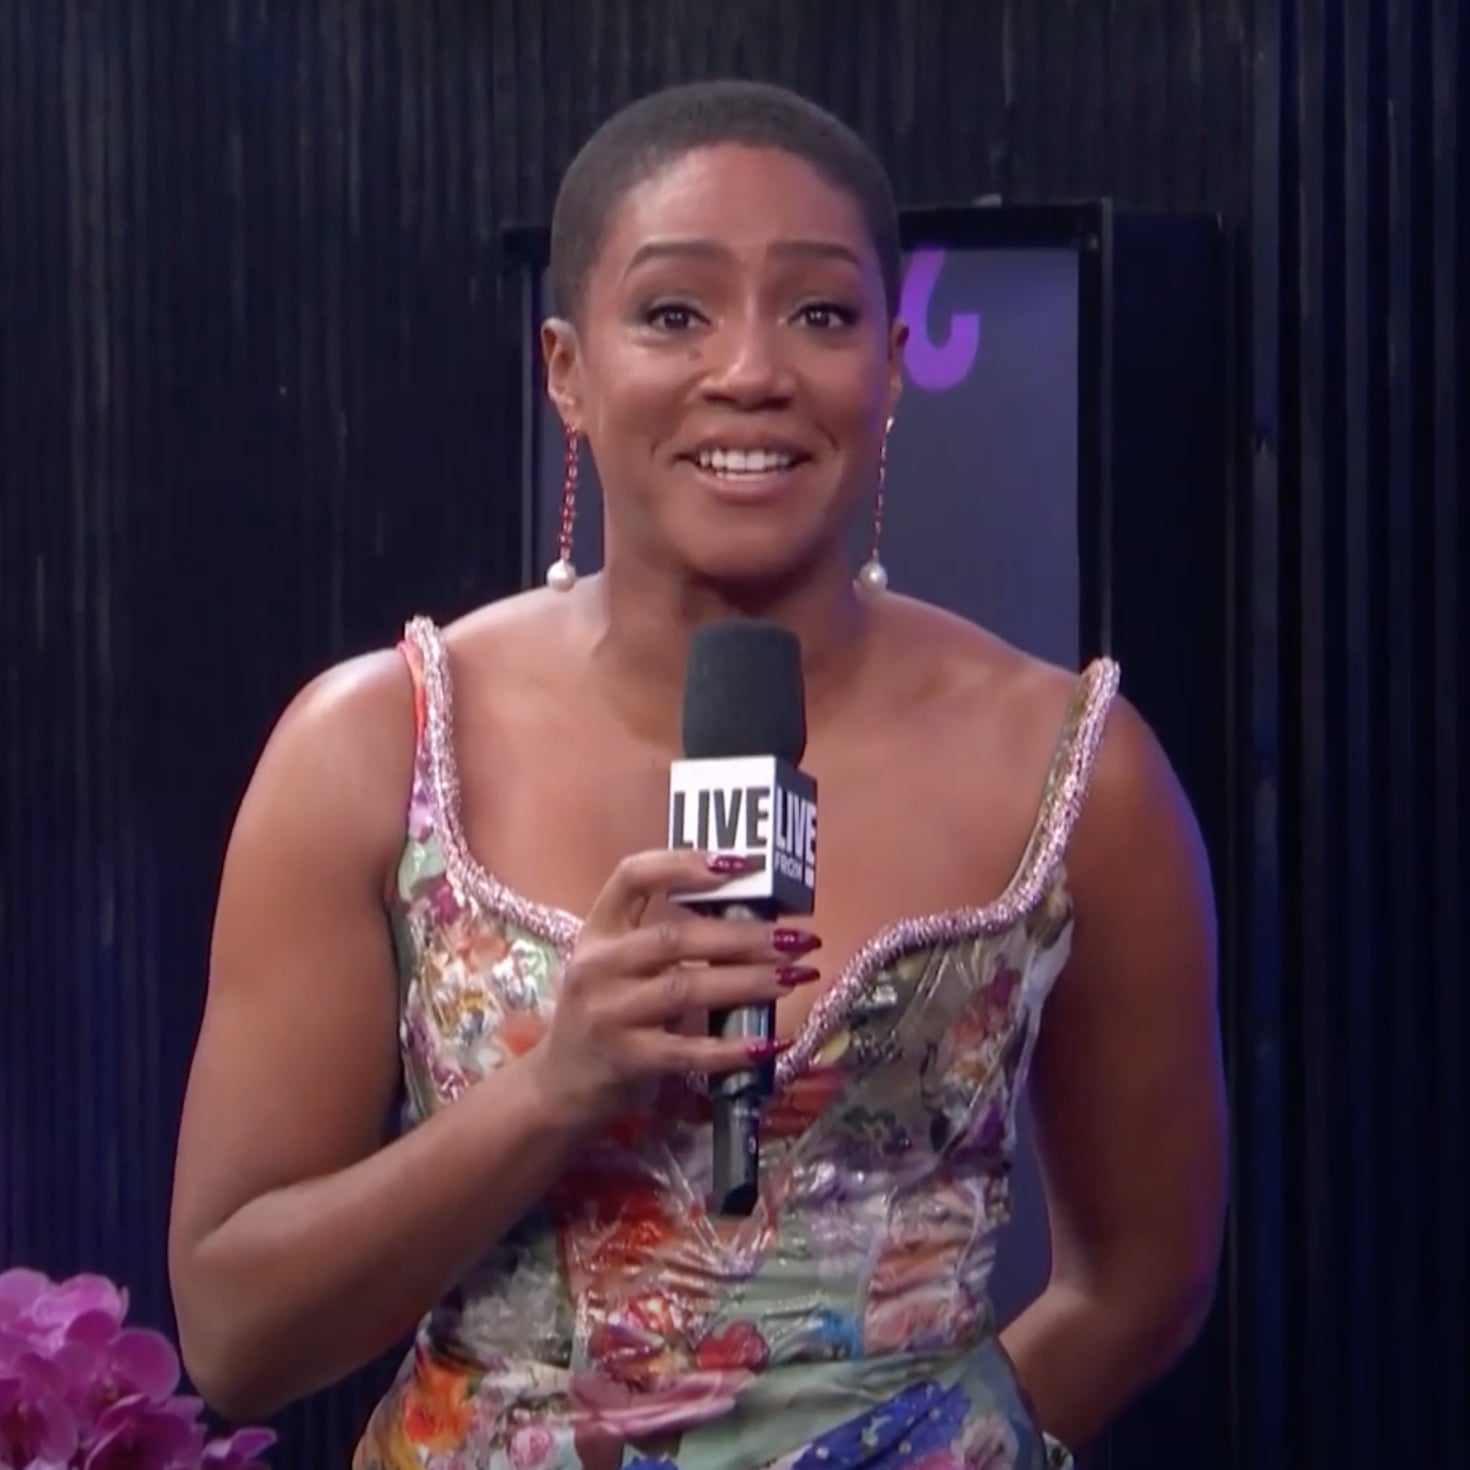 Tiffany Haddish Is Getting Ripped, Says Legs Will be 'Amazing' For